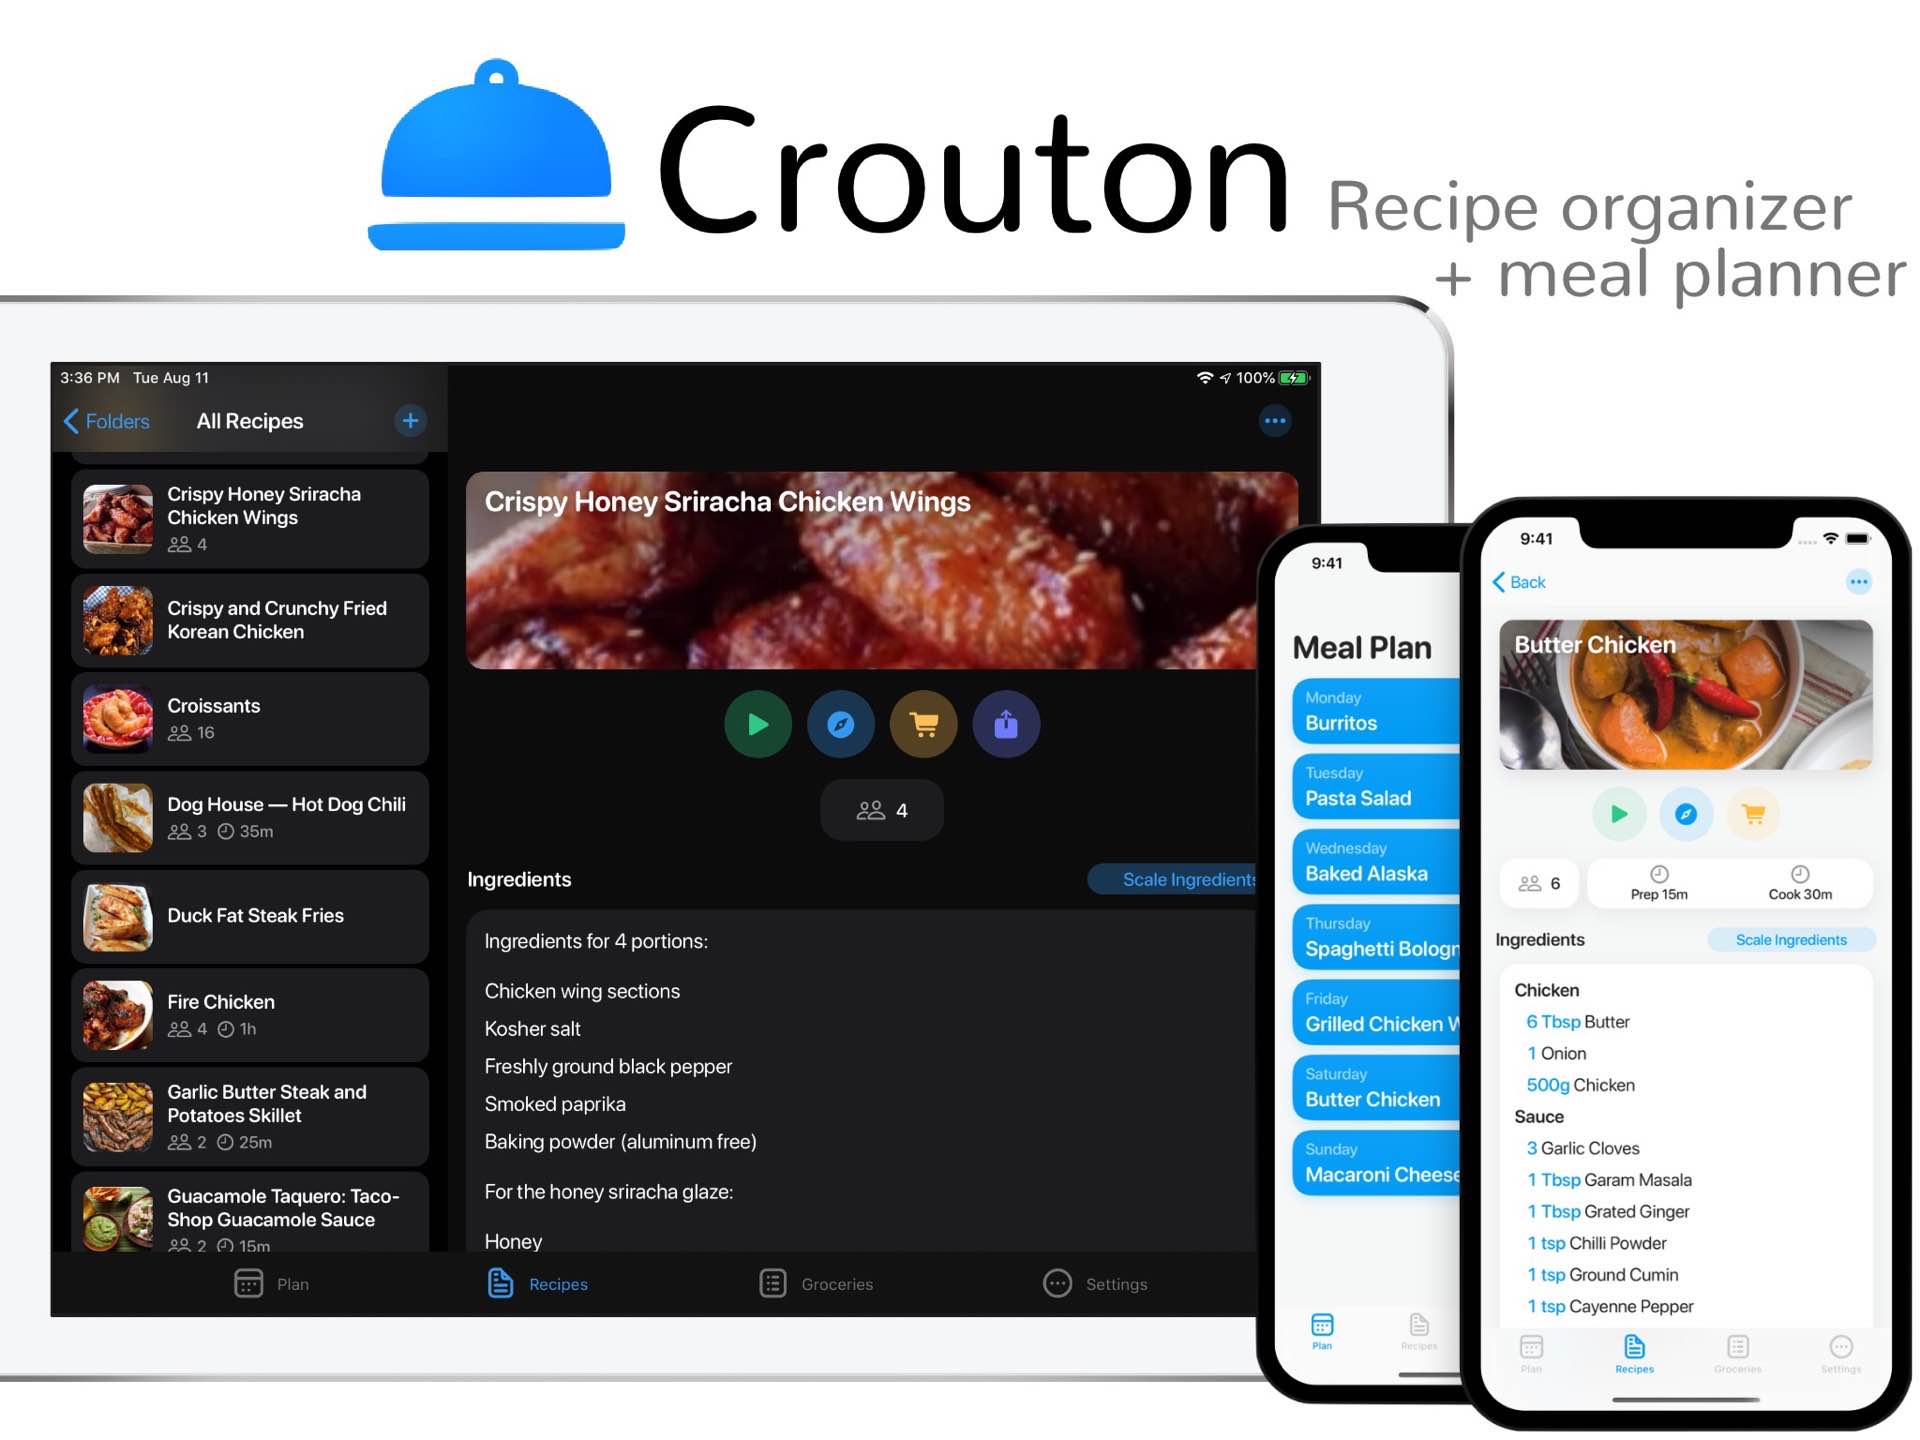 crouton-recipe-and-meal-planner-app-for-iphone-ipad